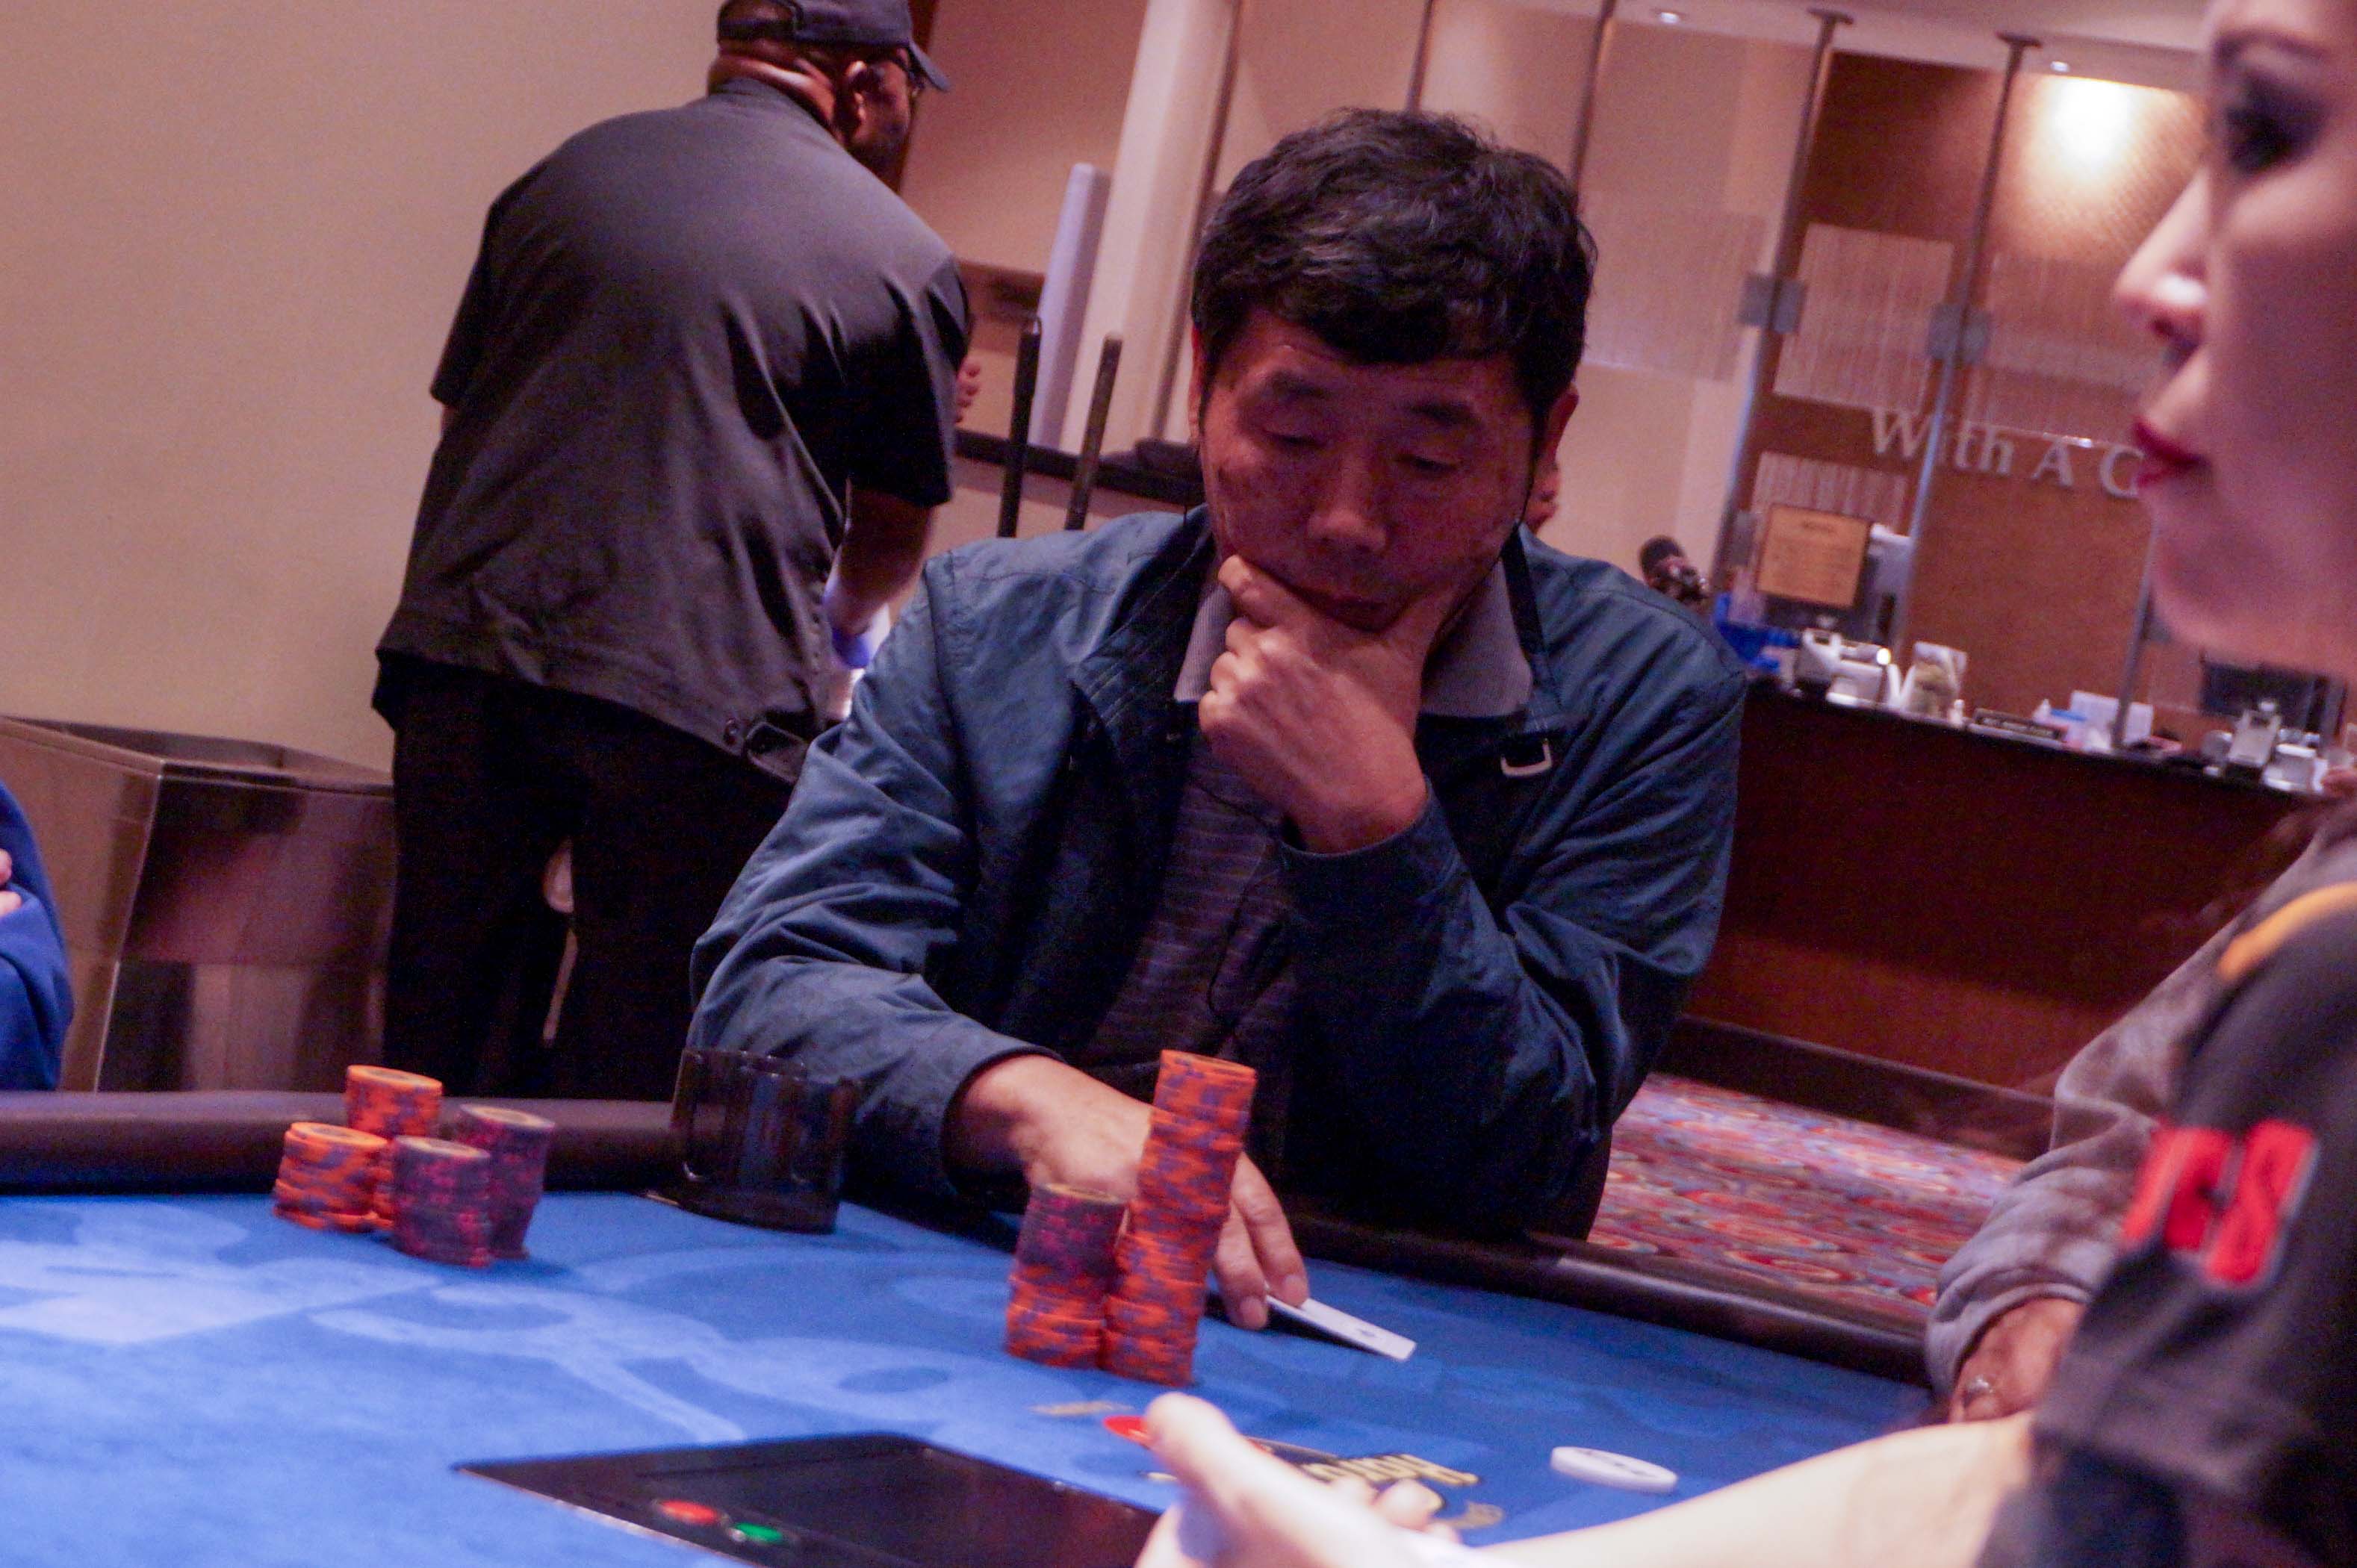 Myong Han - Eliminated in 4th place ($1,634)